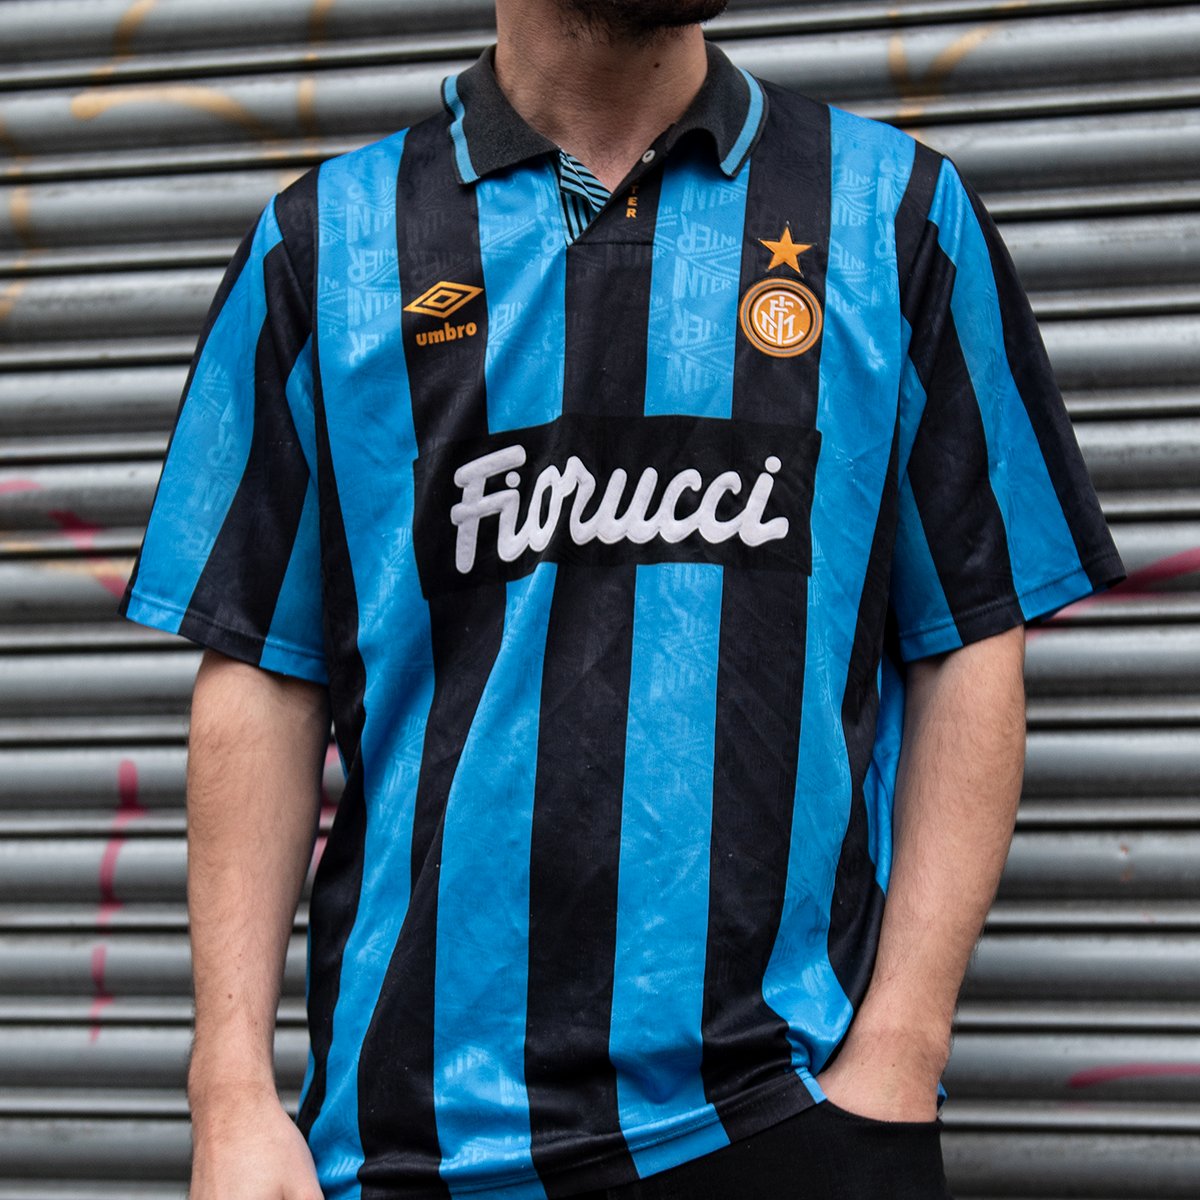 Classic Football Shirts on Twitter: "Inter Milan 1992 Home by Umbro 🔥  Inter's greatest ever shirt? Dropping on the site in the New Year!  https://t.co/8PGu3Tnoko" / Twitter